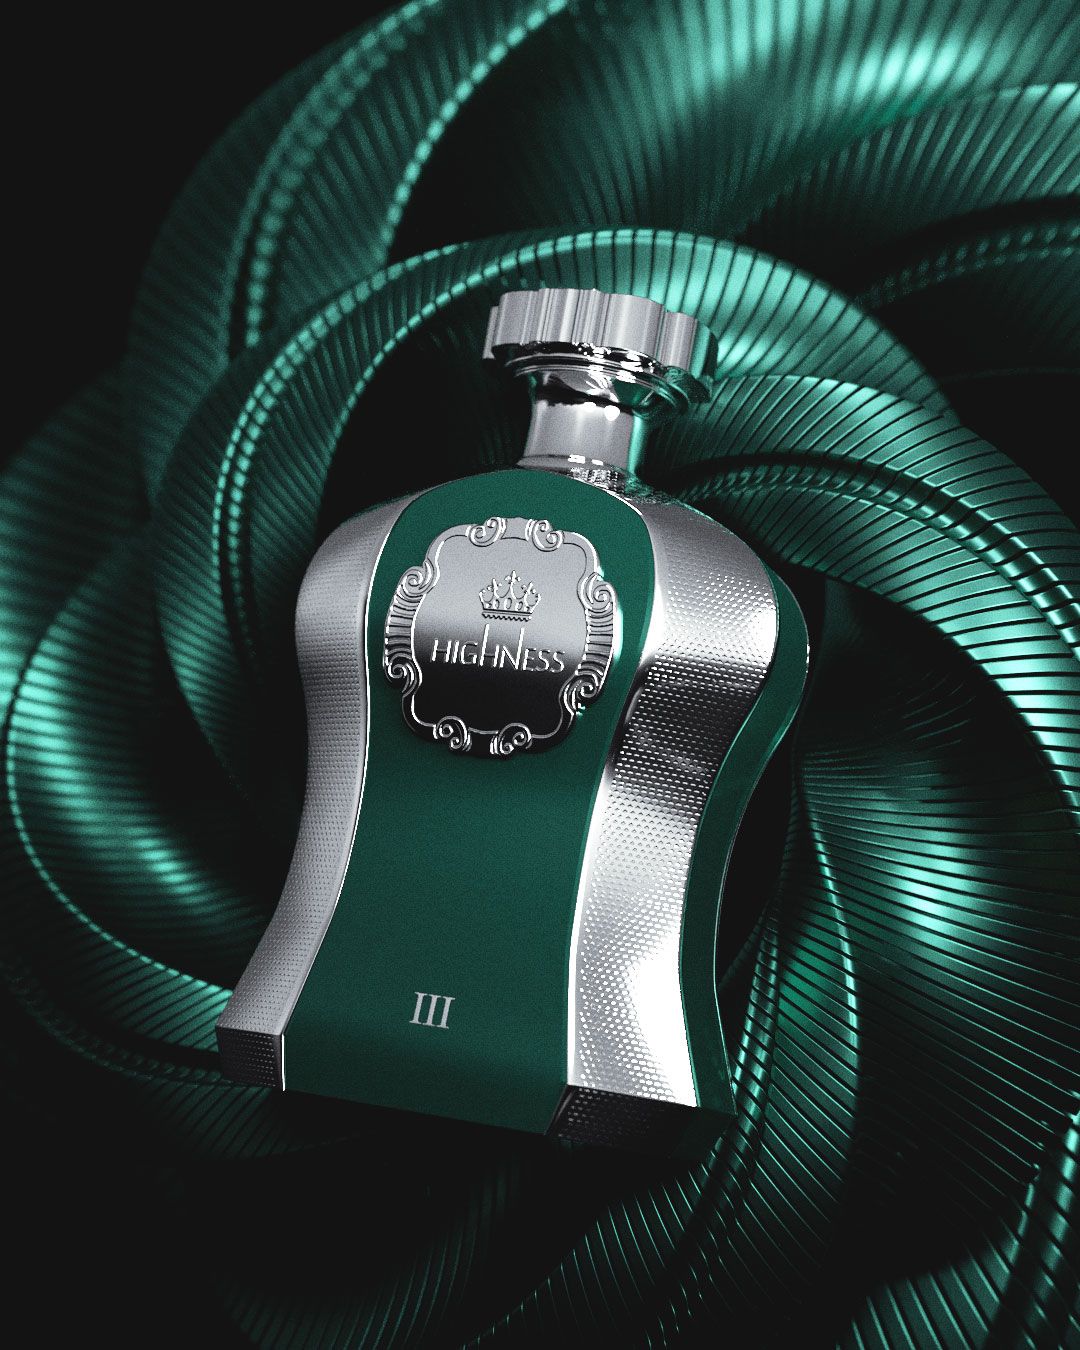 The image presents a striking perfume bottle set against an abstract, swirled green background that complements the bottle's color. The bottle has a unique curved silhouette, with a combination of smooth green surfaces and a textured silver area that creates a visual contrast. It features a prominent label with the word "HIGHNESS" and the Roman numeral "III" in an ornate frame, suggesting a regal theme.